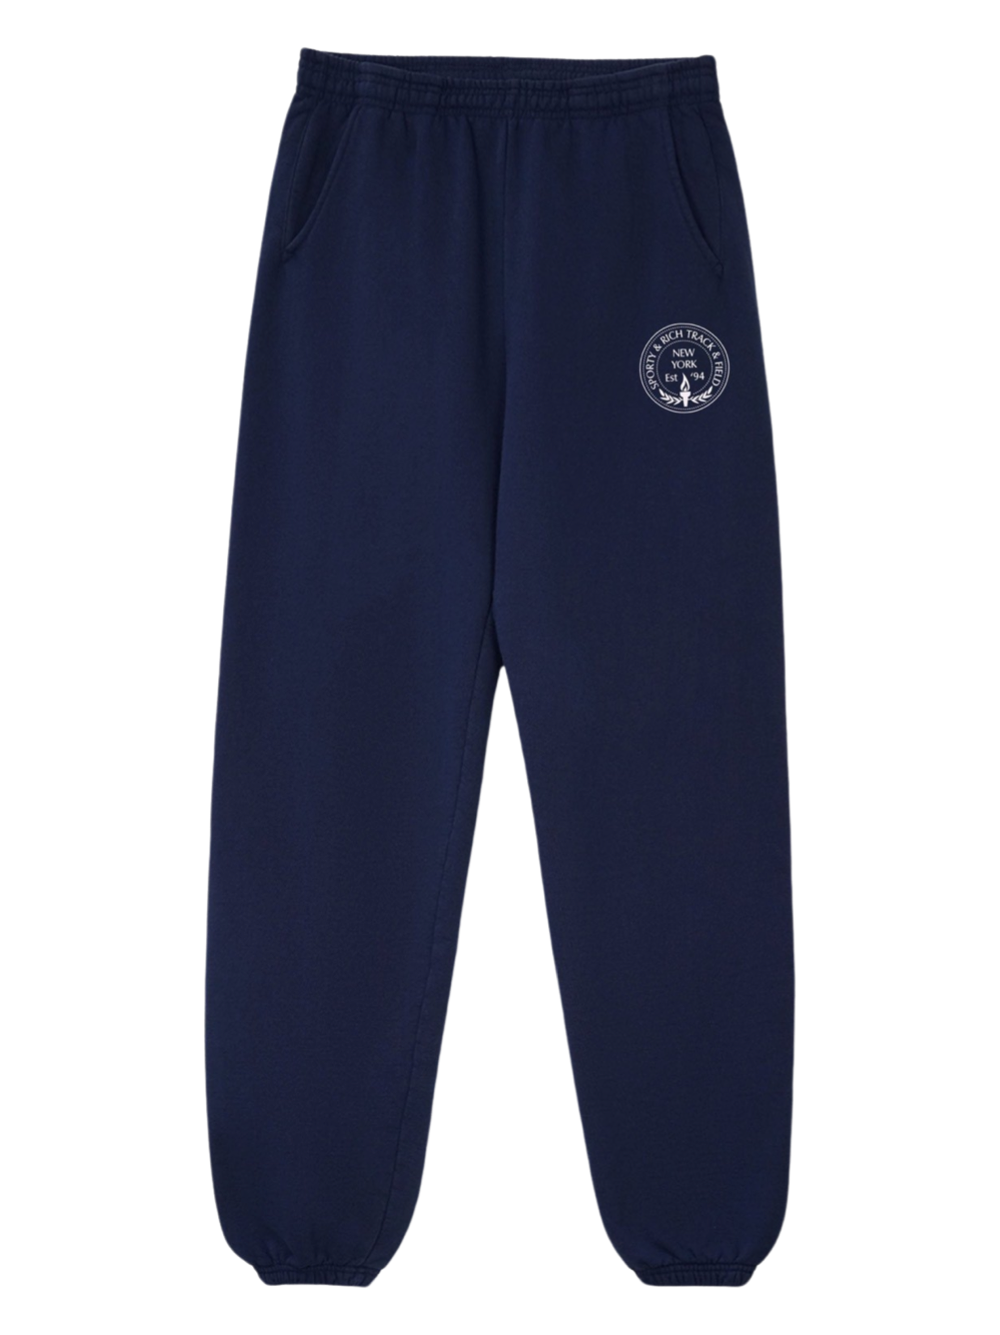 Sporty & Rich Central Park Sweatpants in Navy